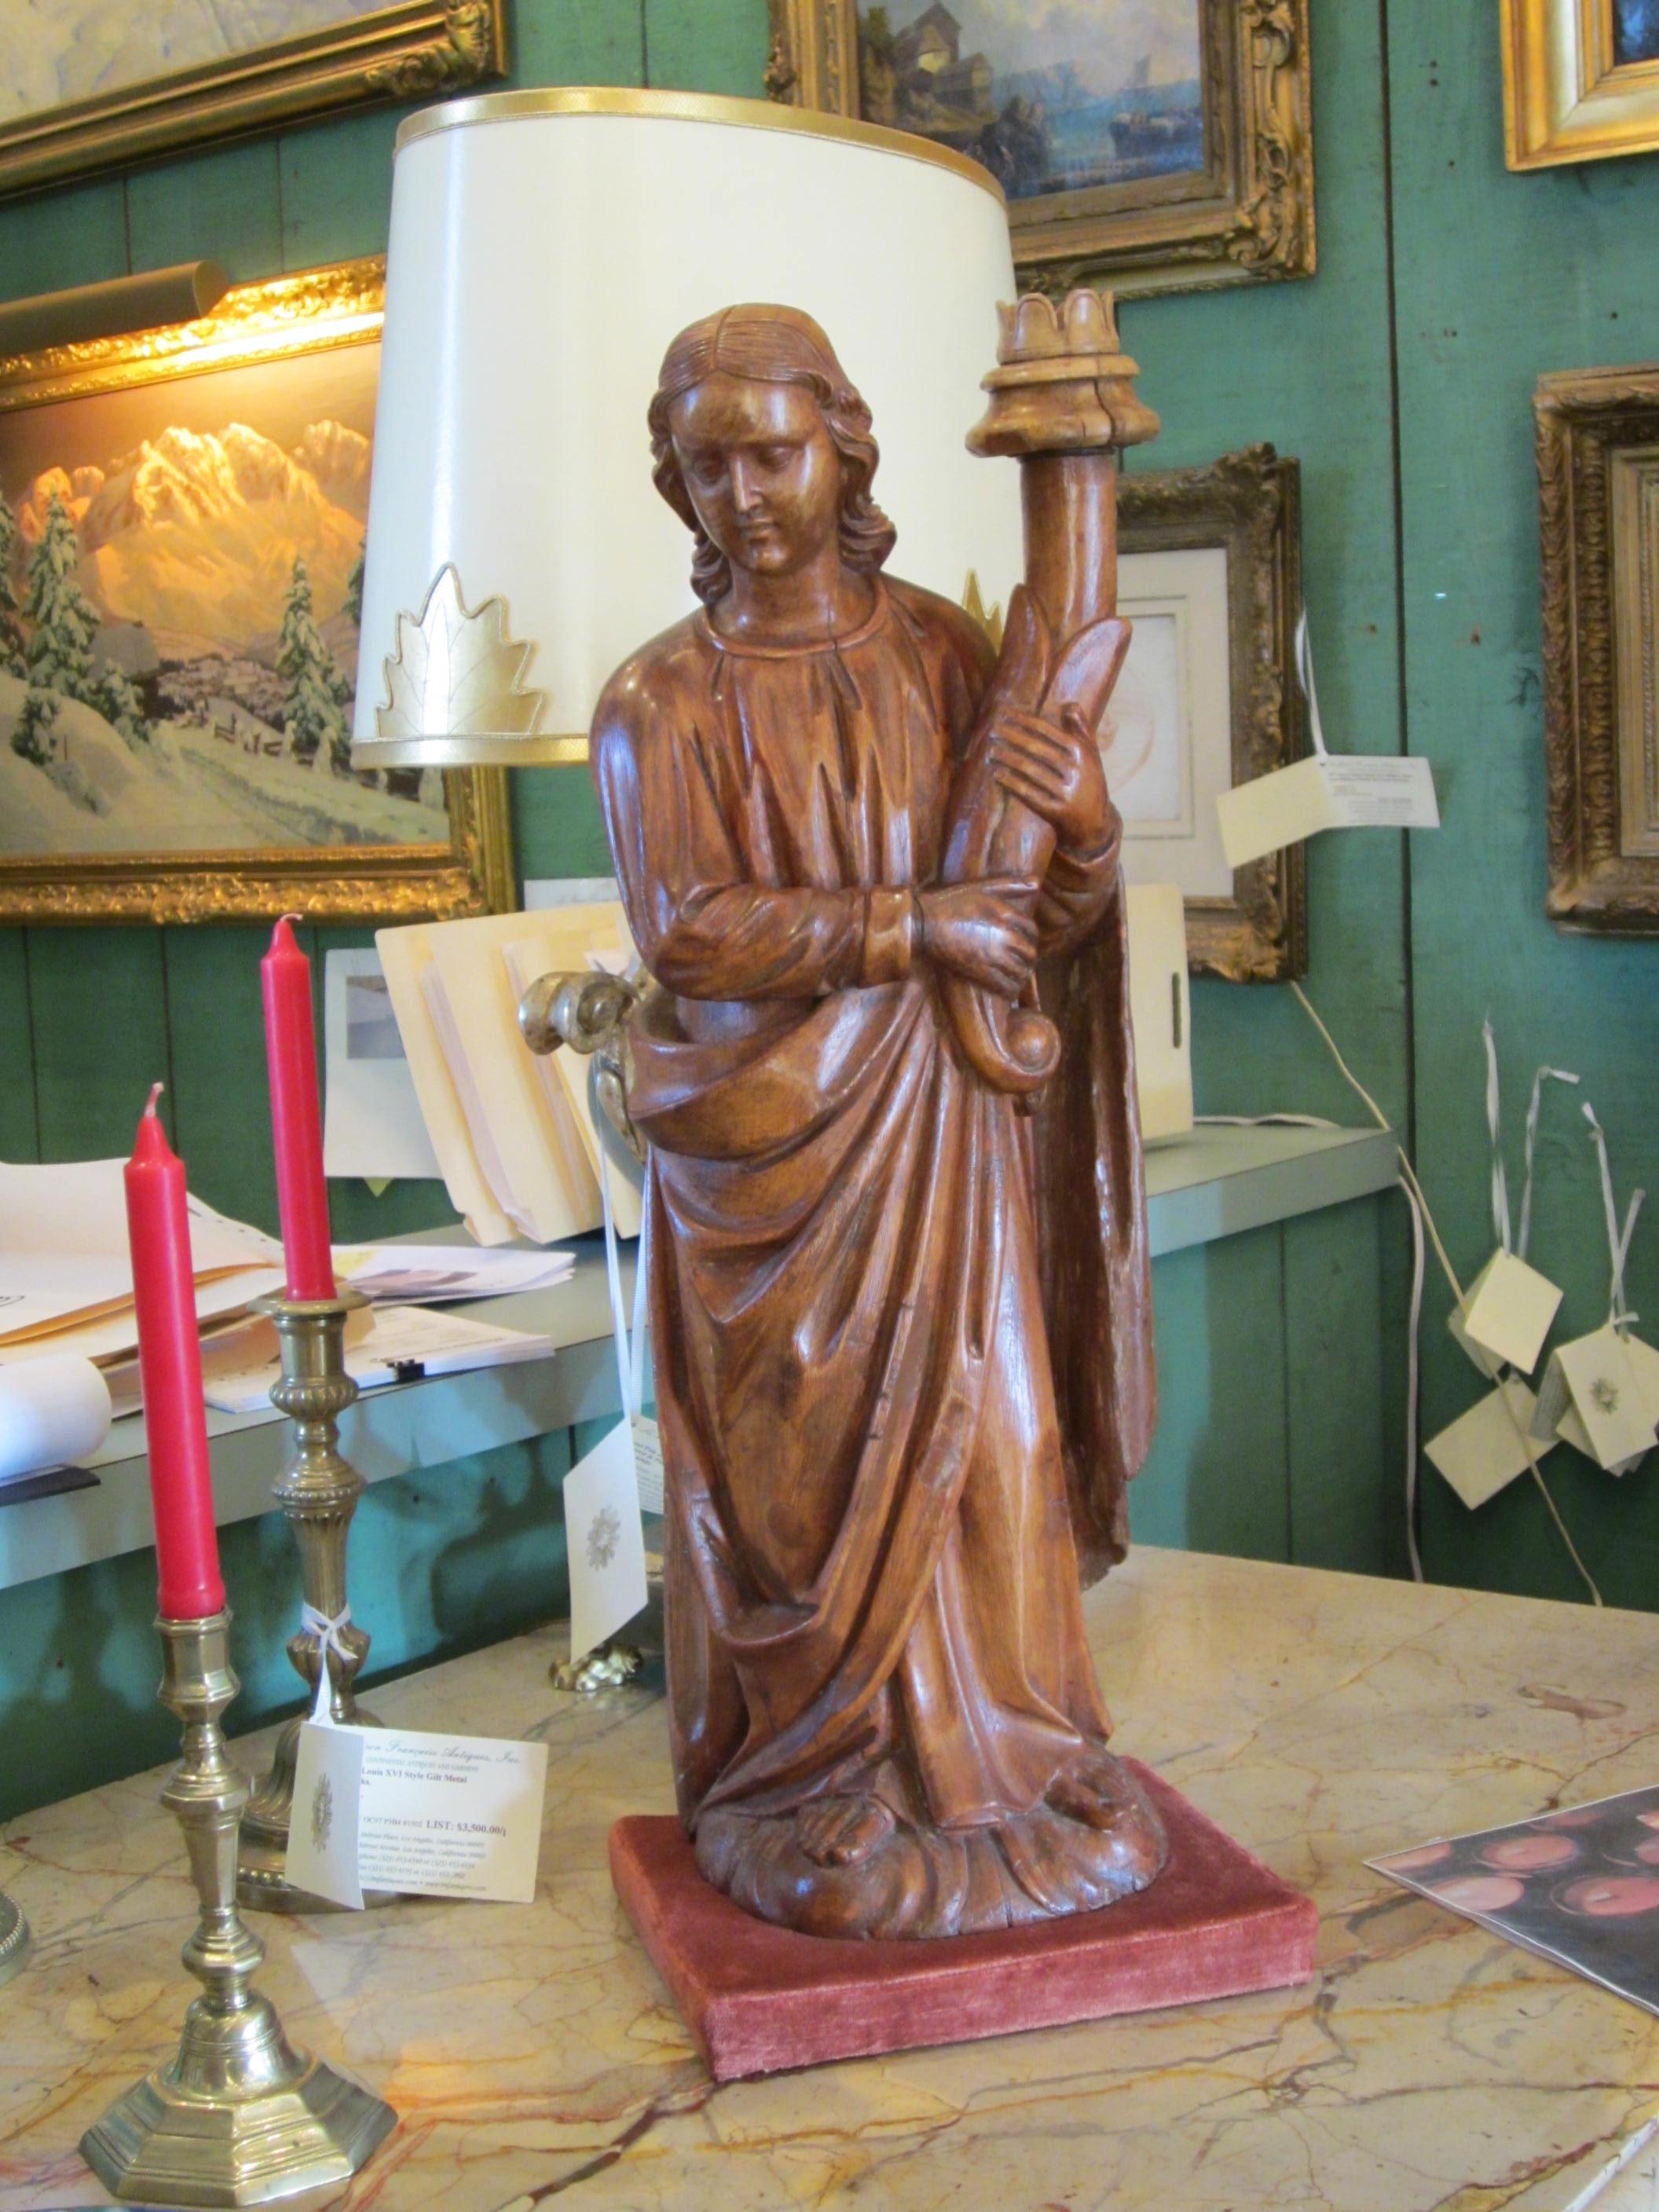 Hand Carved Wood Figure Sculpture Angel Statue Antiques Los Angeles California For Sale 10